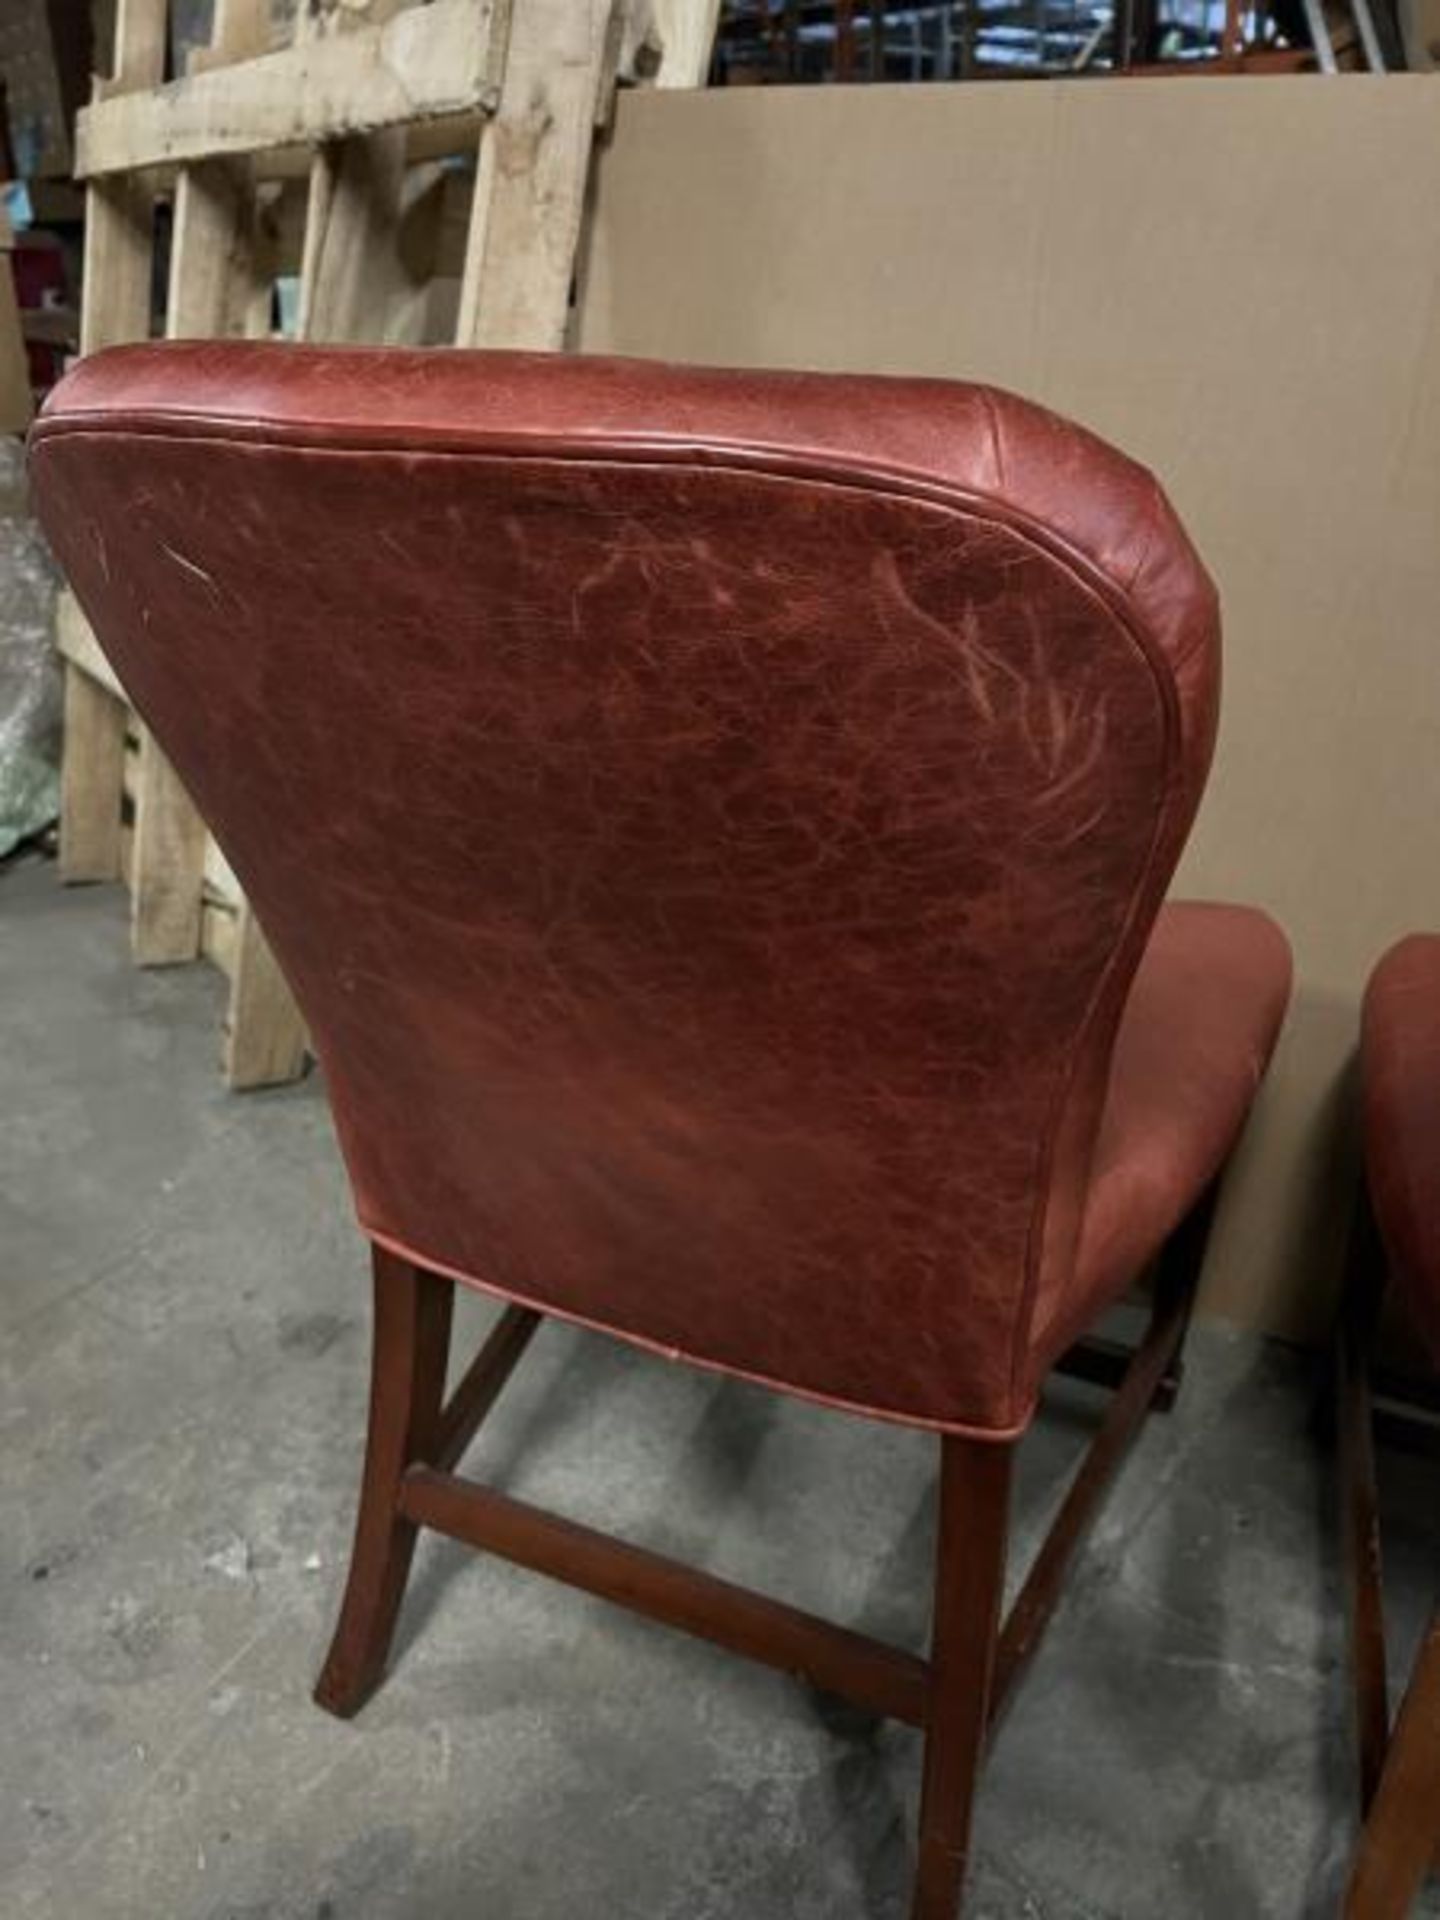 Pair of Red Vinyl Chairs; Located in Mill Building - Image 16 of 20